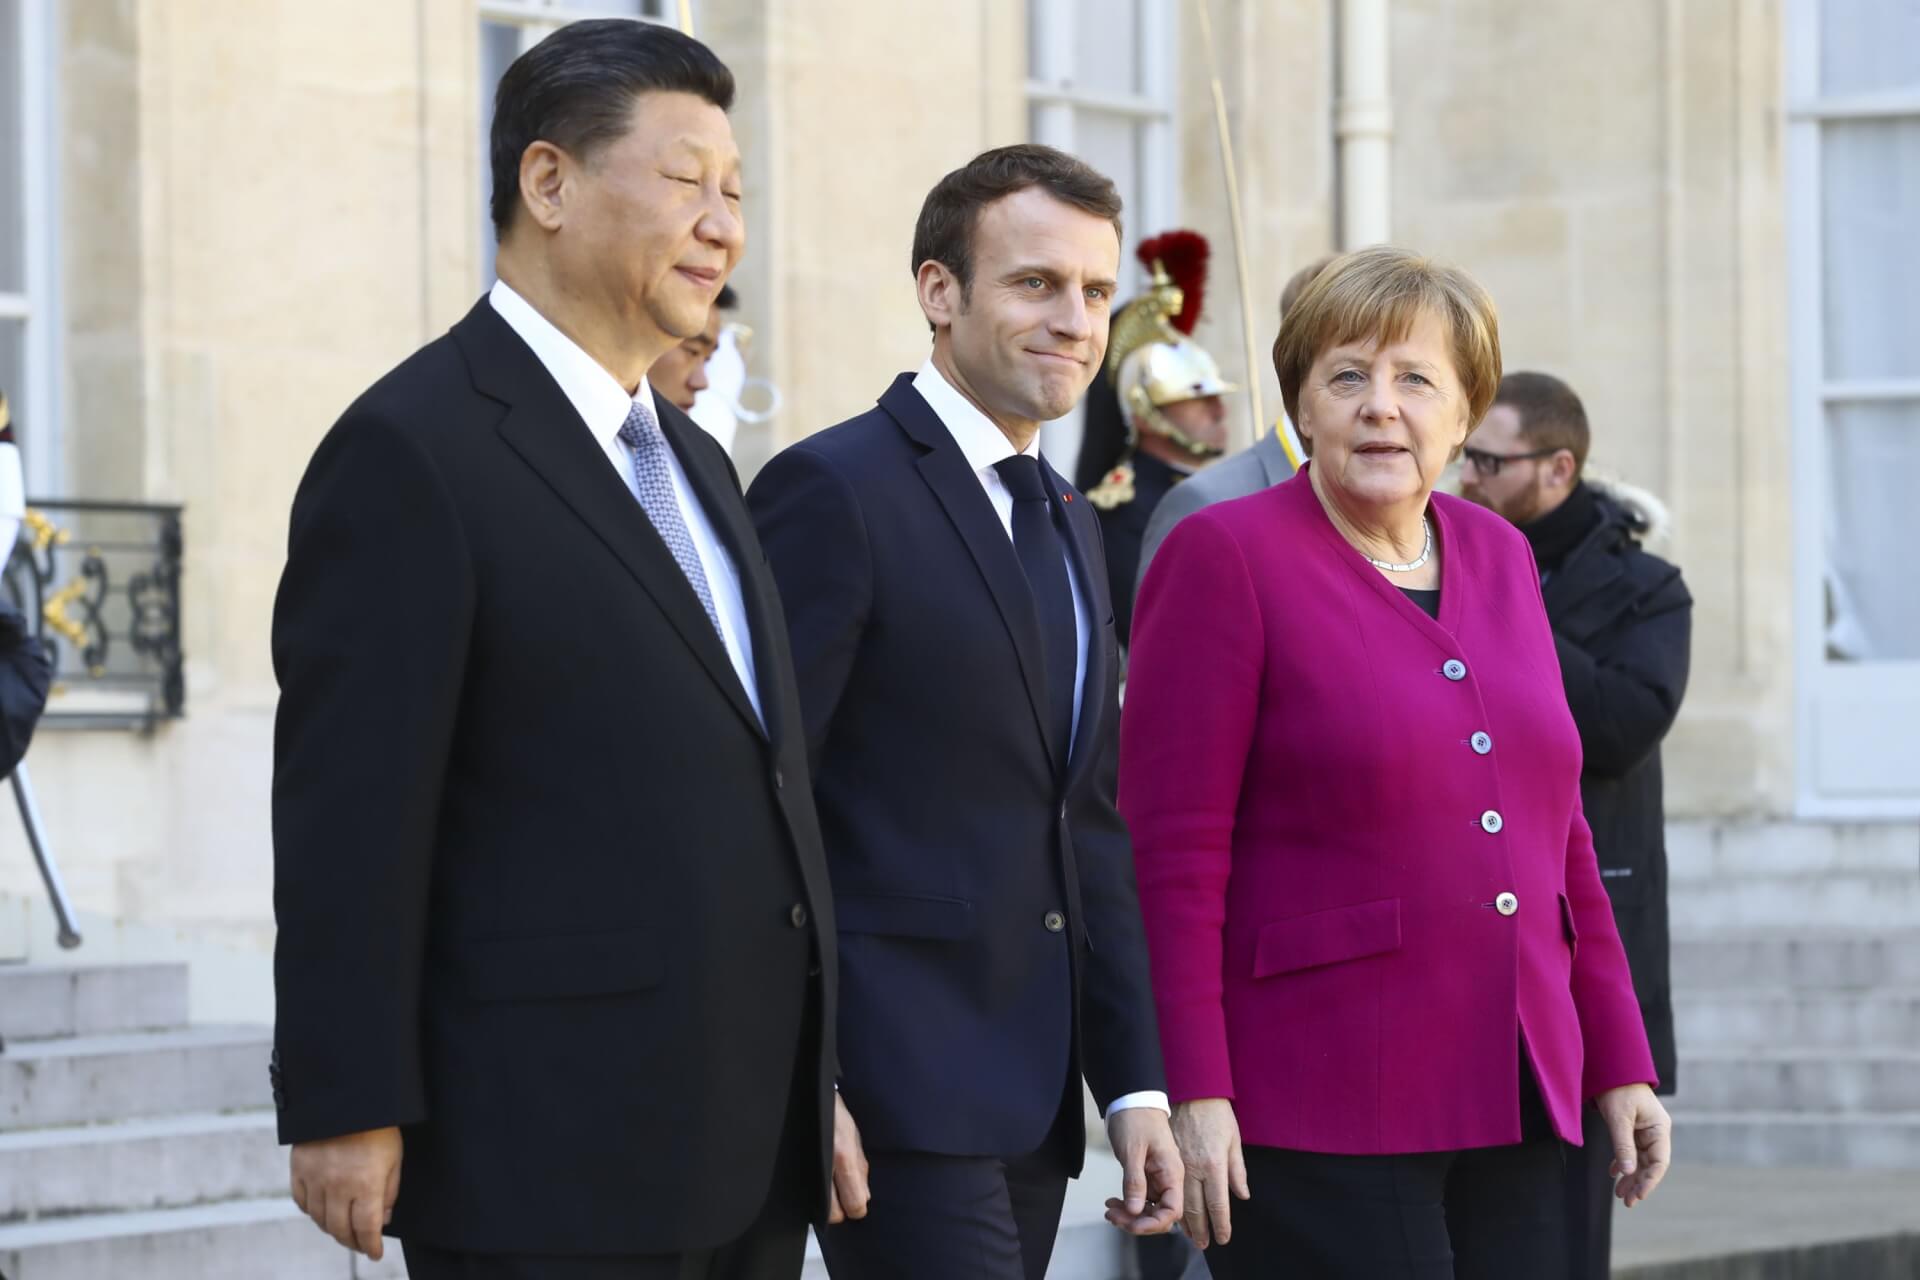 Xi Advocates For “Multilateralism and Cooperation” In Meeting With Merkel and Macron